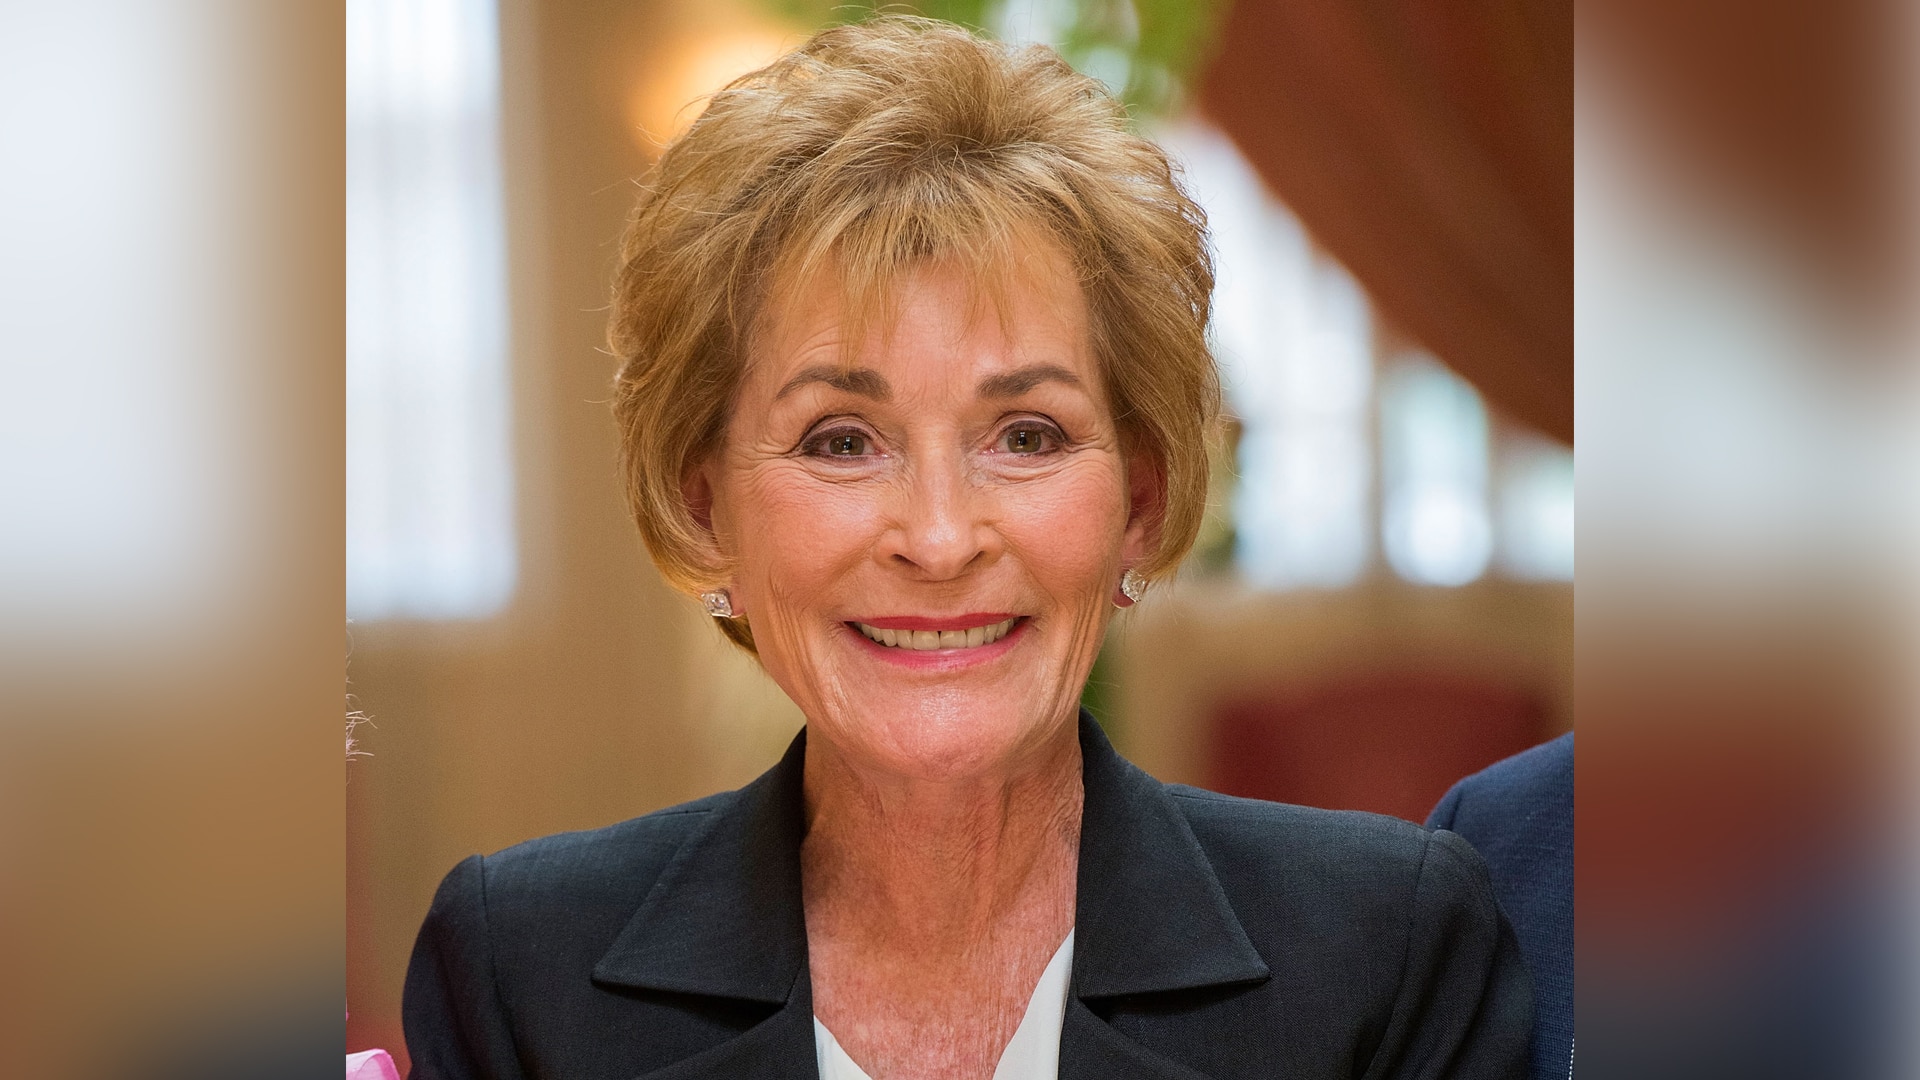 Watch Access Hollywood Interview Judge Judy Is The HighestPaid TV